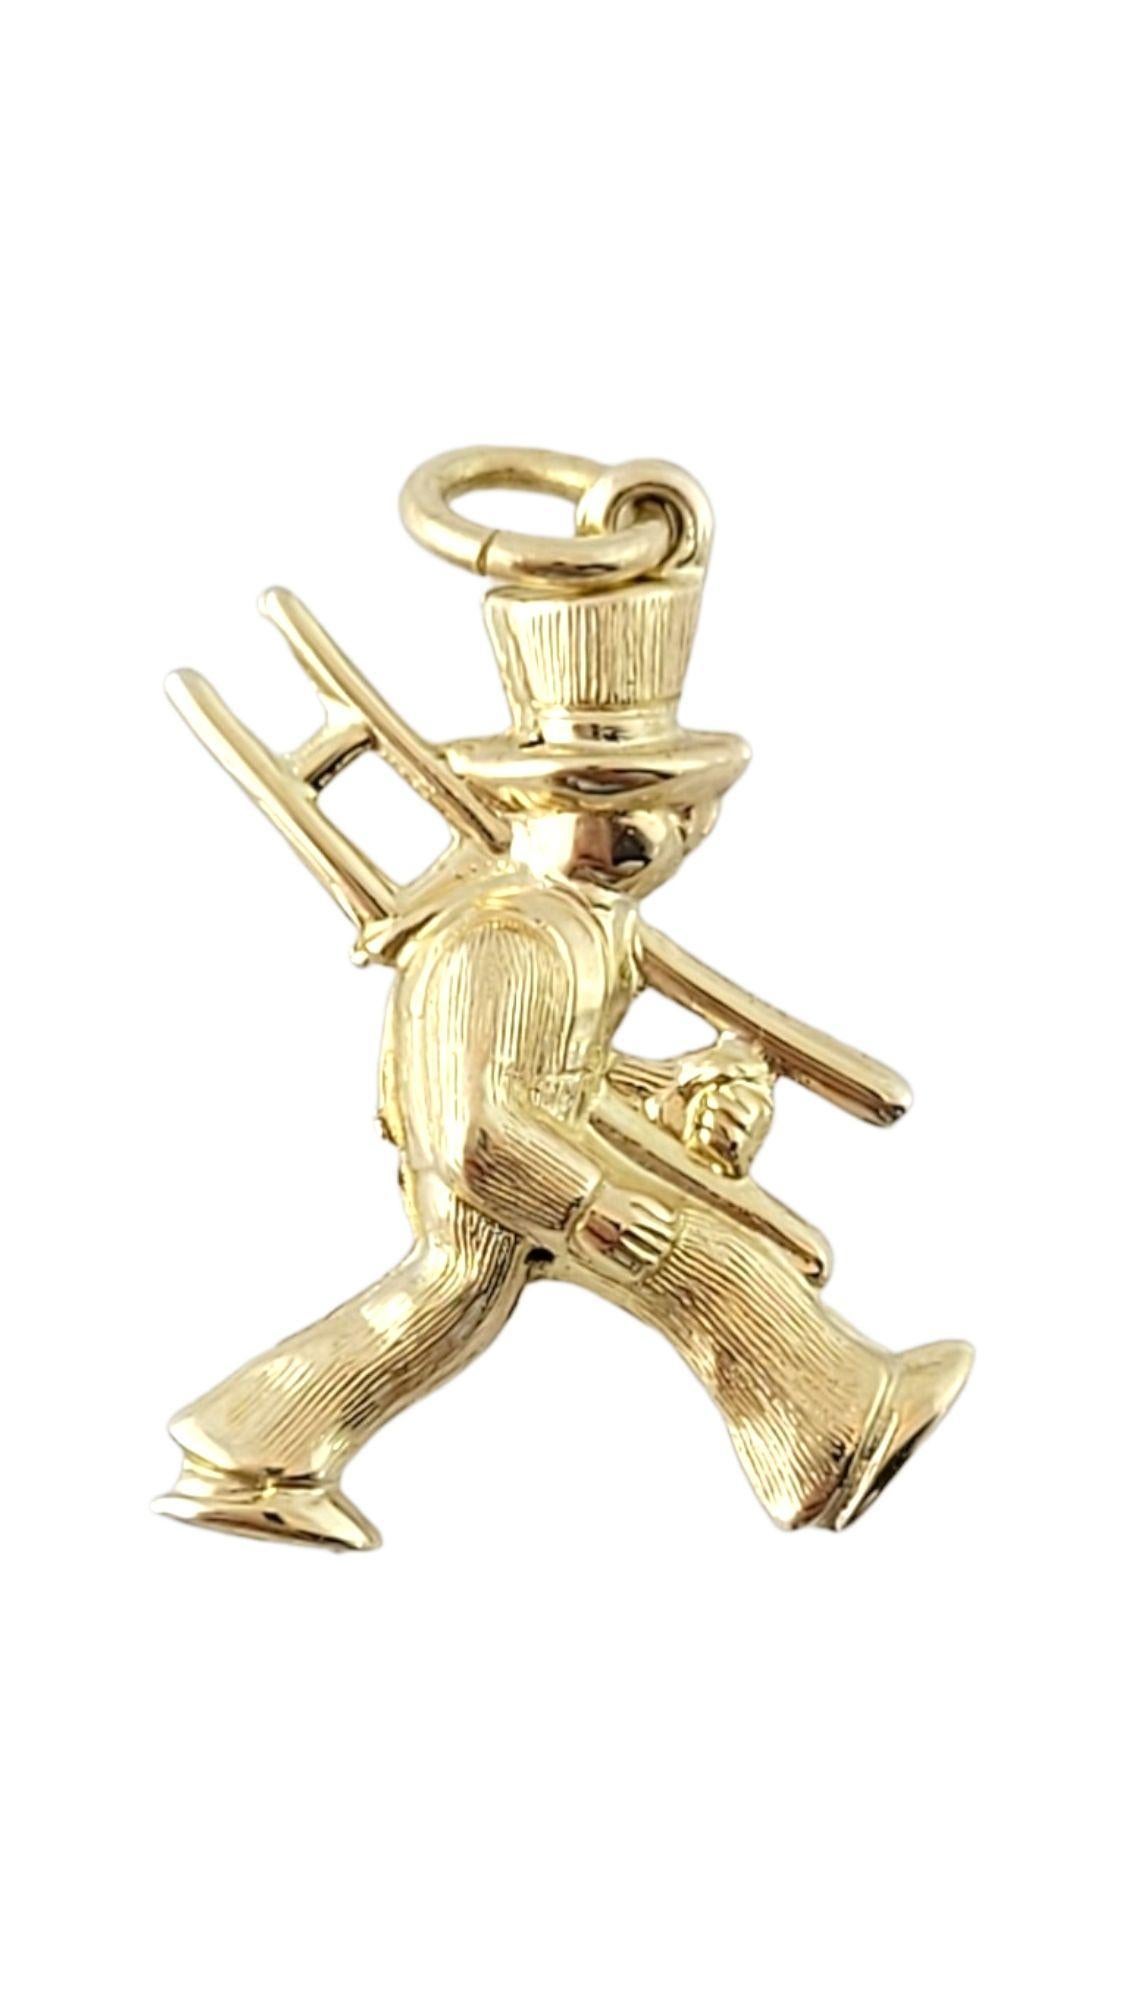 Vintage 8K Yellow Gold Handyman Charm

This adorable handyman charm is crafted from 8K yellow gold!

Size: 21.3mm X 16.2mm X 3.8mm
Length w/ bail: 25.9mm

Weight: 0.83 g/ 0.5 dwt

Hallmark: 333

Very good condition, professionally polished.

Will